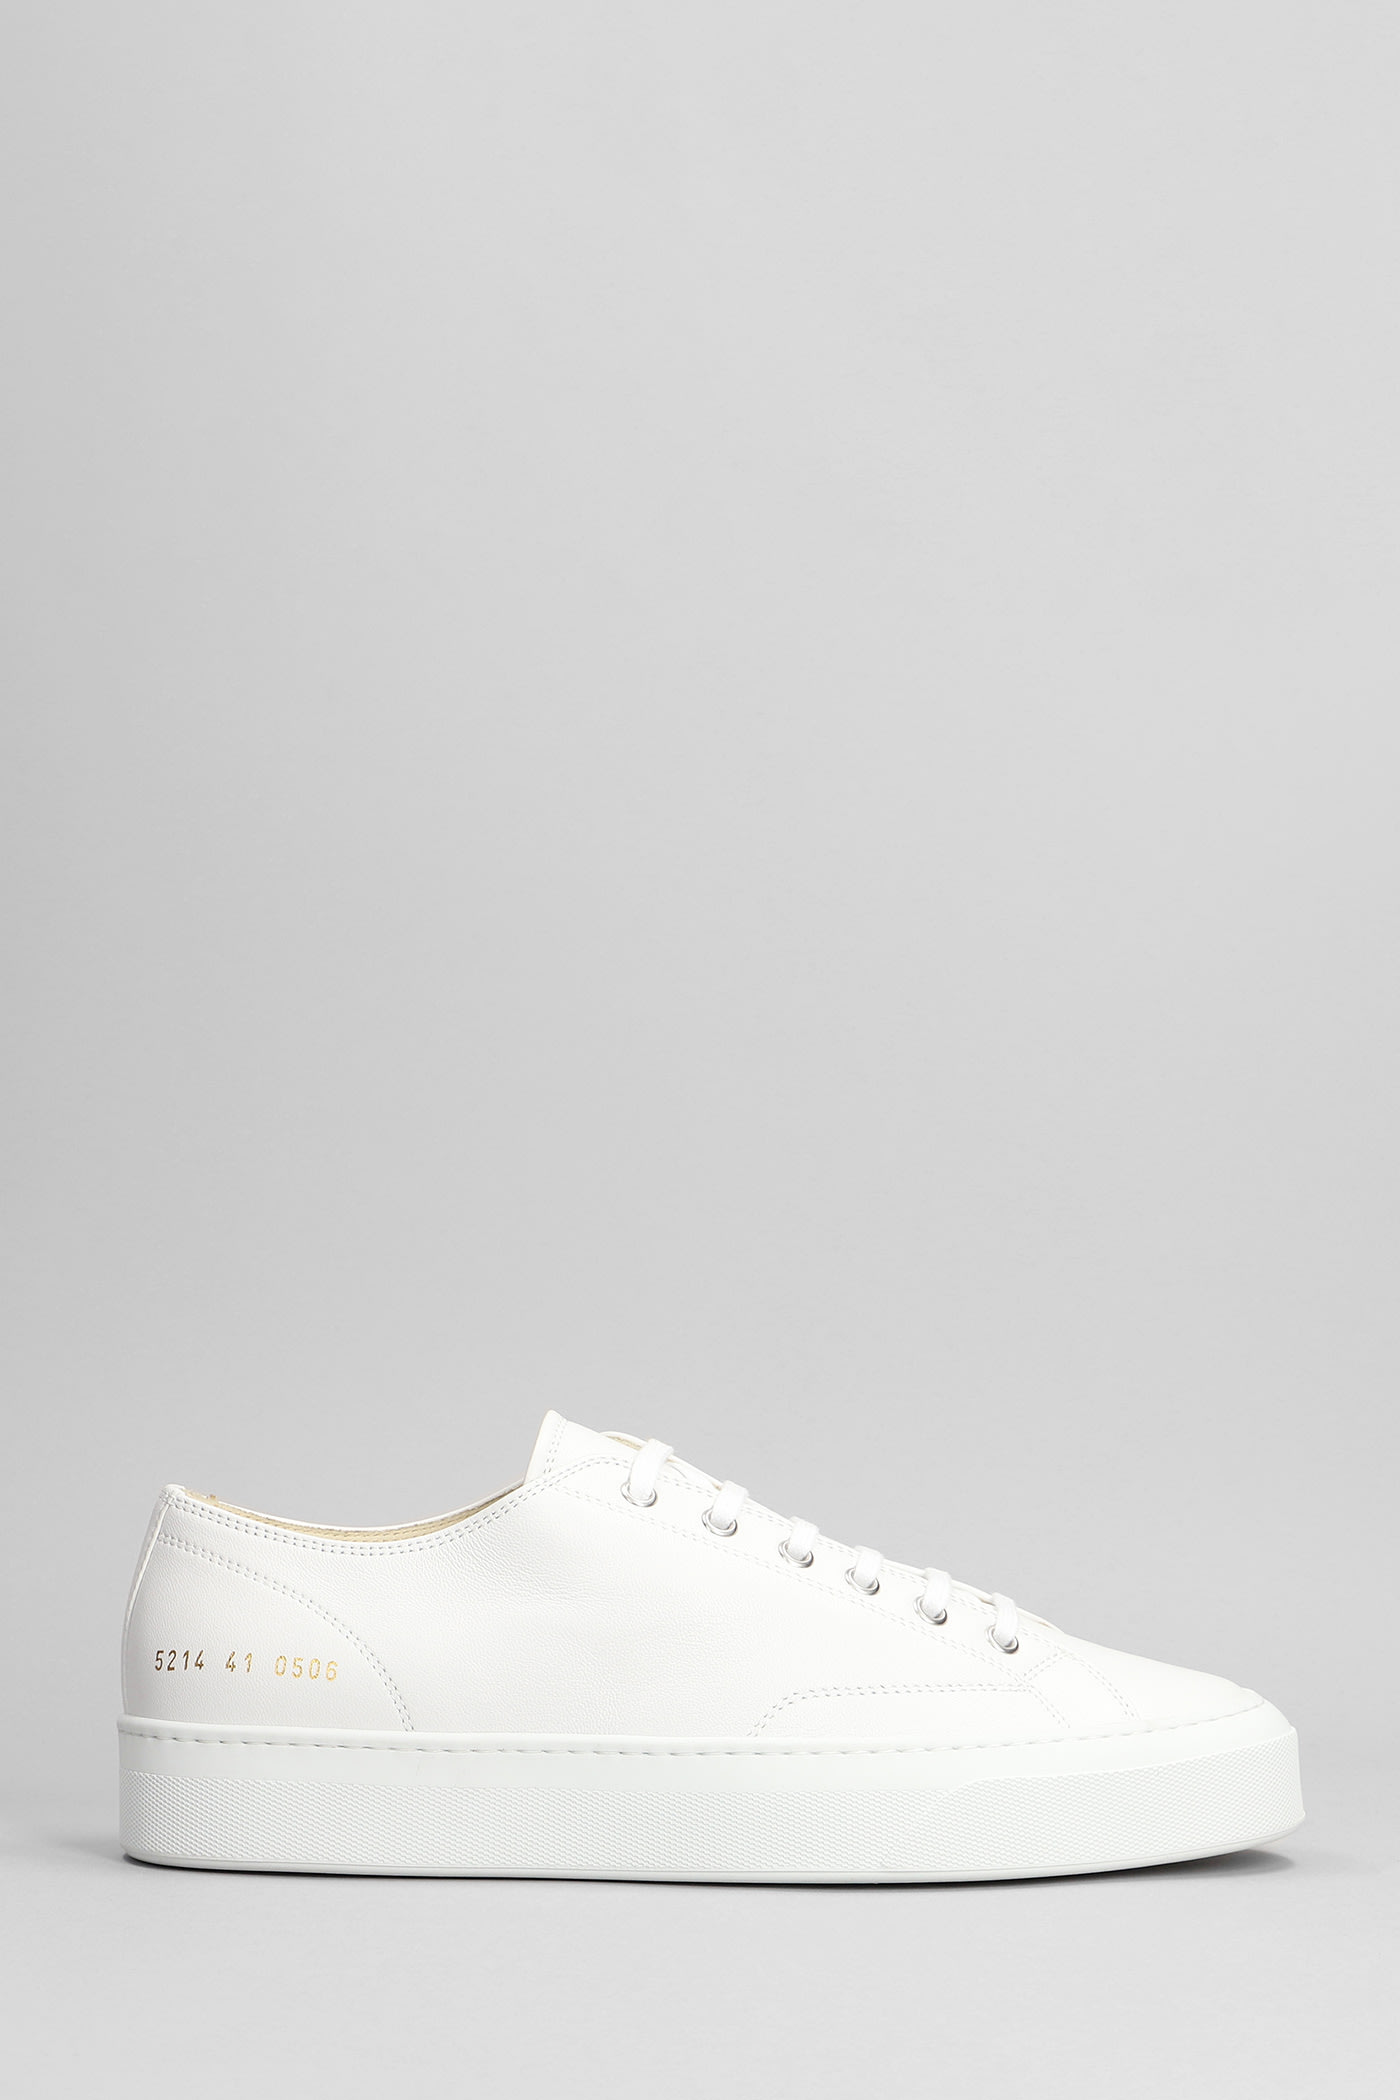 Common Projects Tournament Sneakers In White Leather